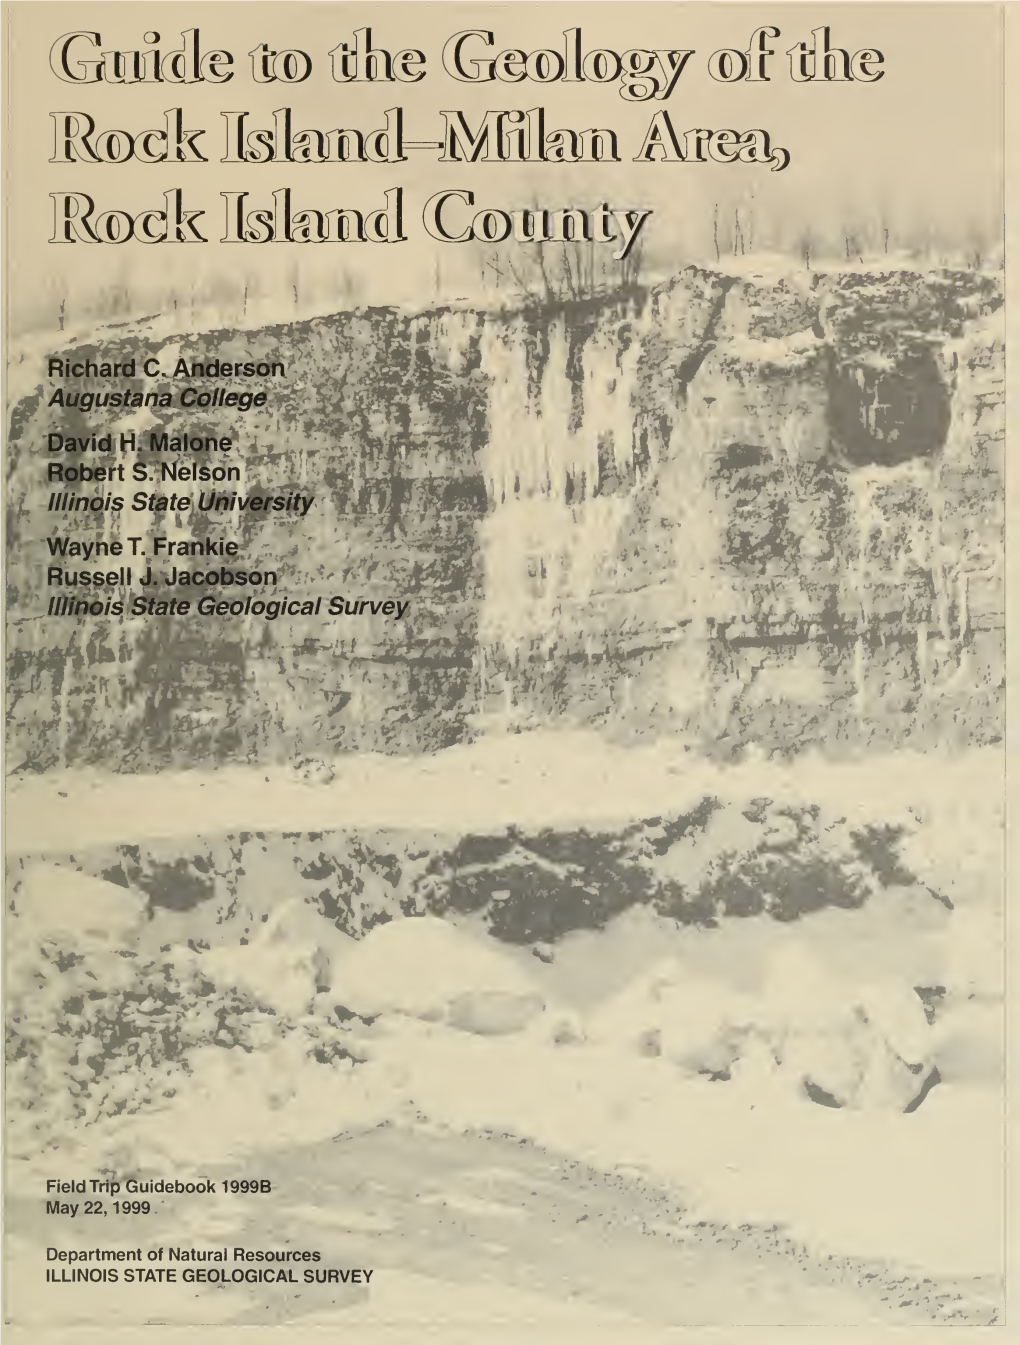 Guide to the Geology of the Rock Island-Milan Area, Rock Island County